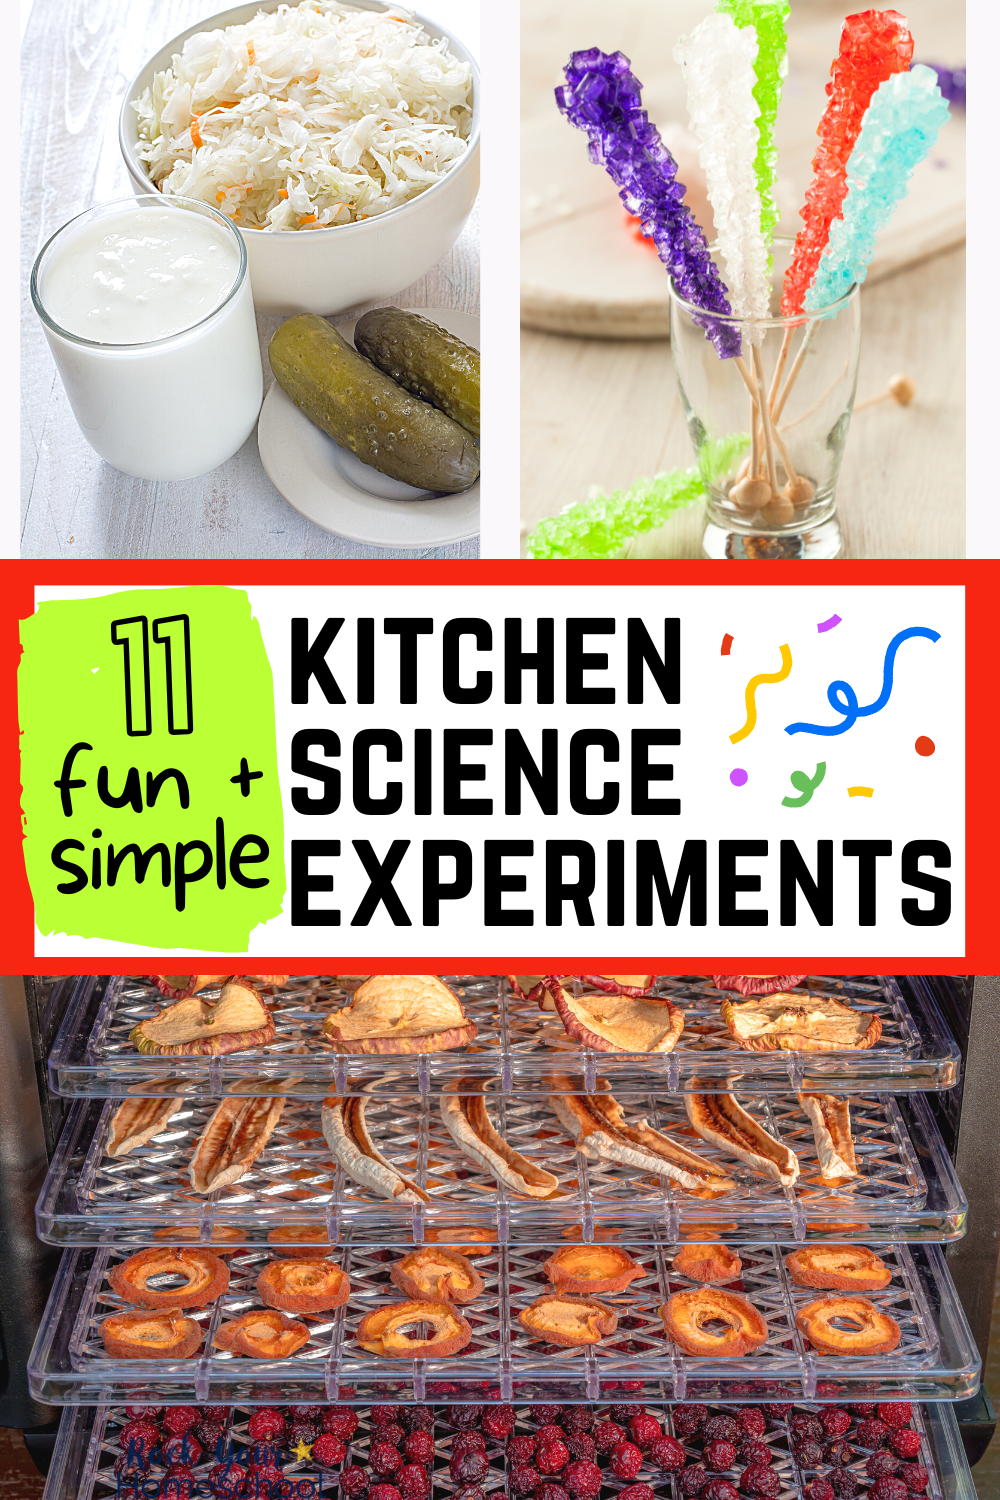 Kitchen Science Experiments: How to Keep It Simple + 11 Fun Ideas